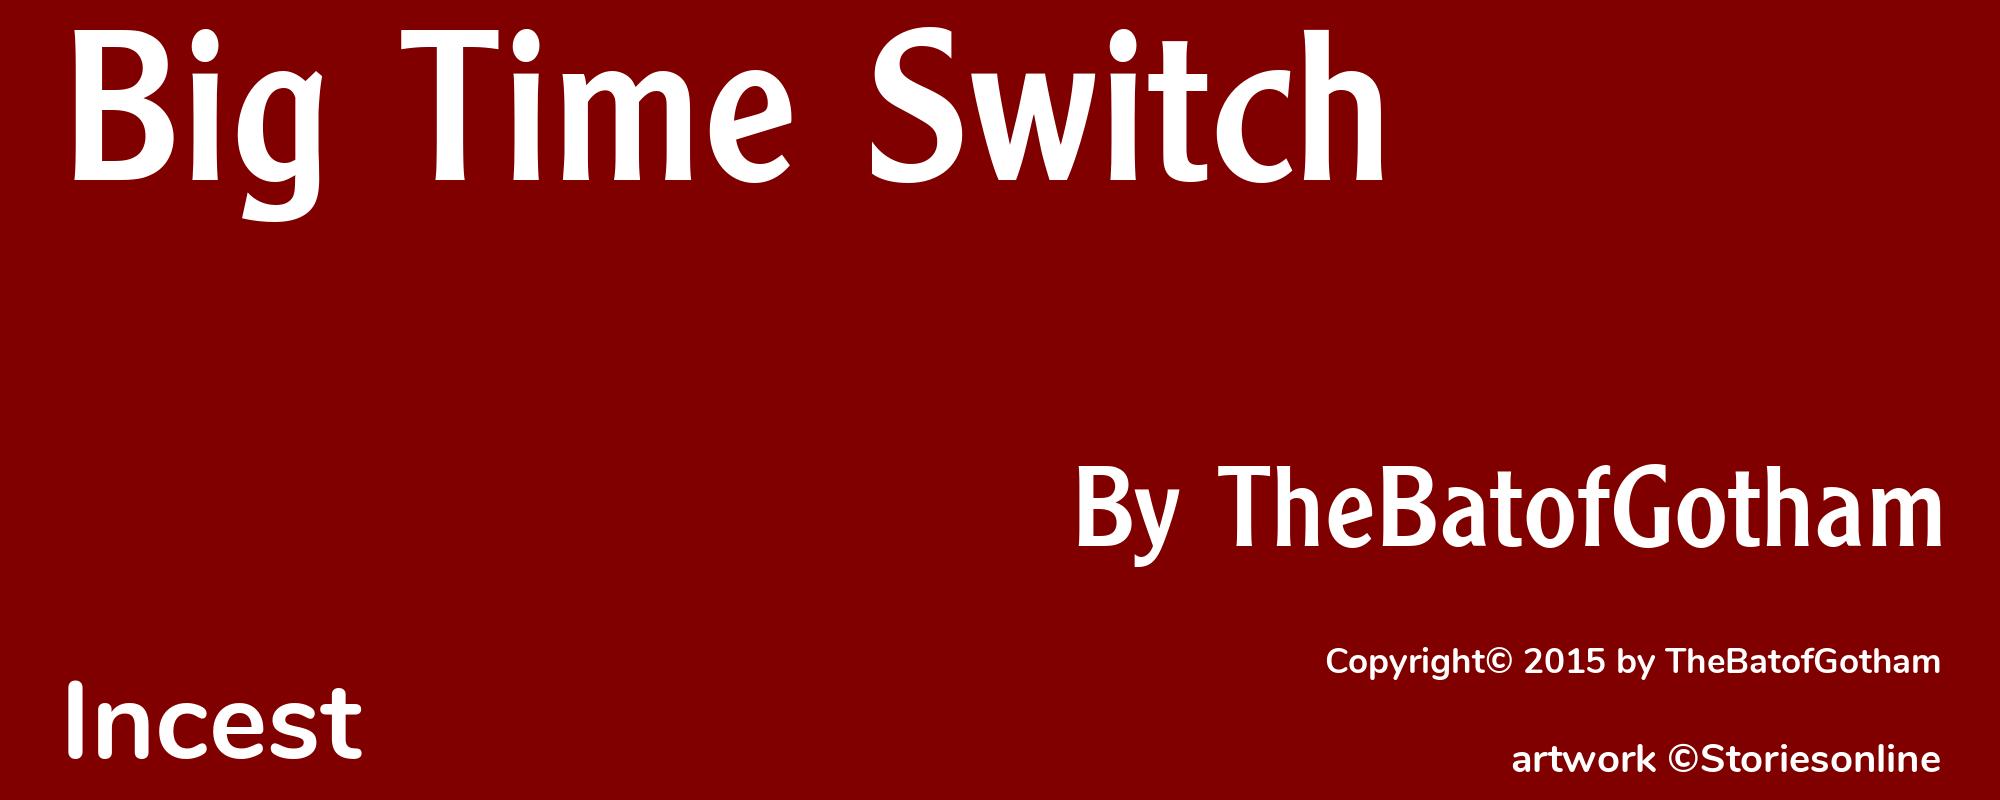 Big Time Switch - Cover